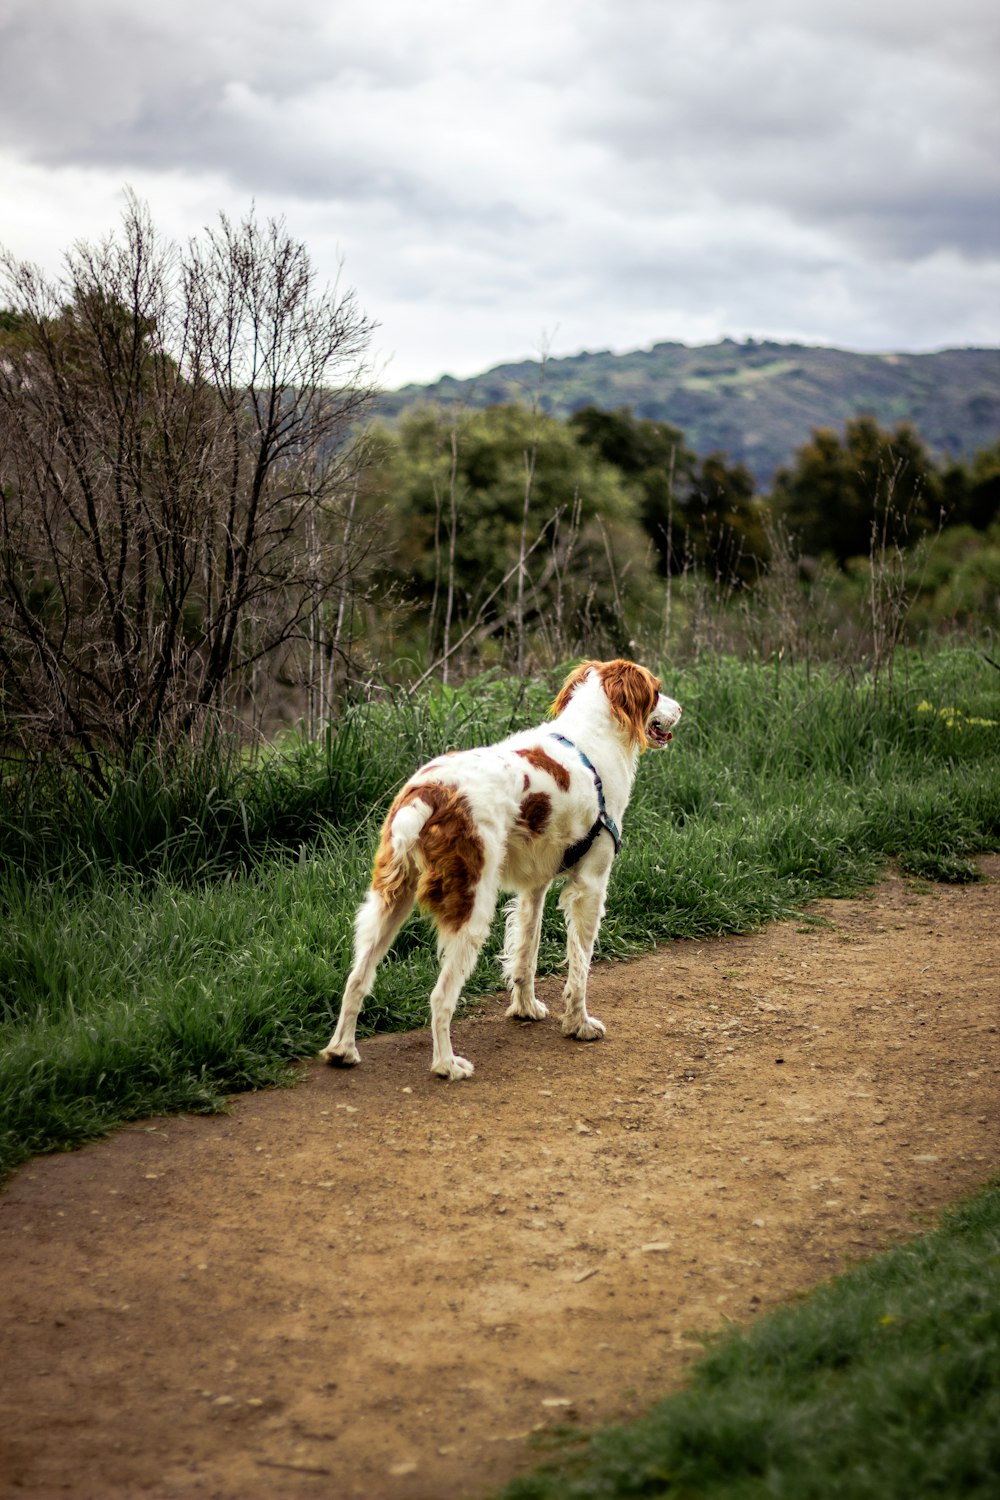 white and brown short coated dog on brown dirt road during daytime